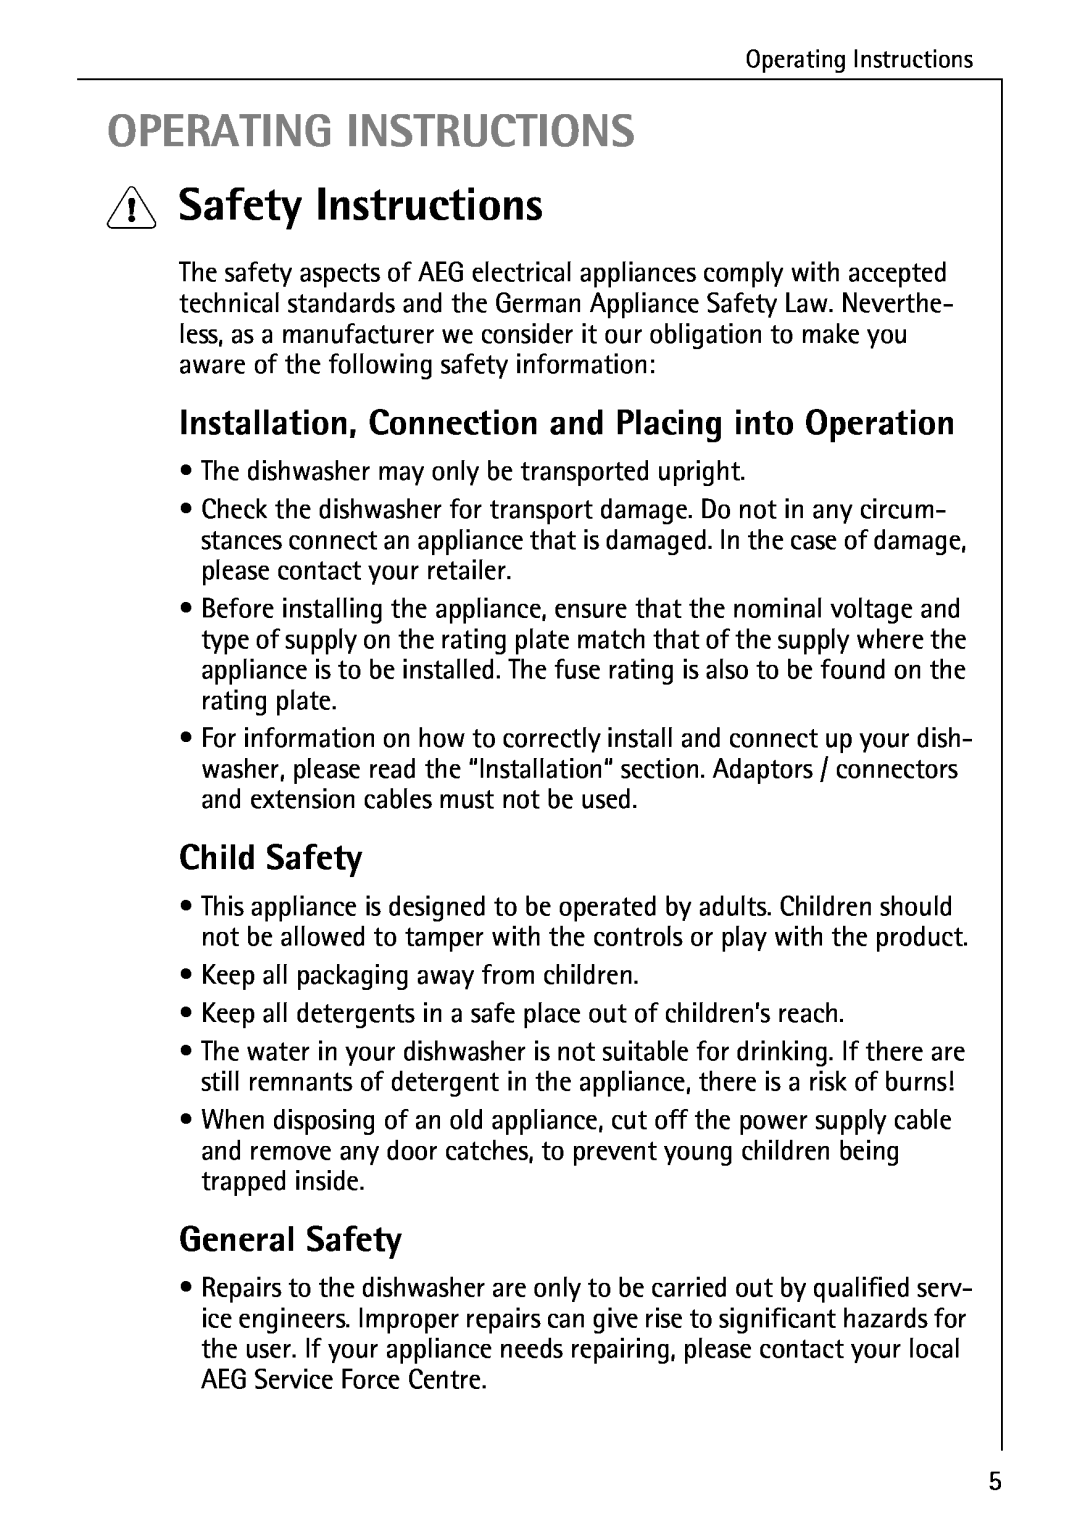 AEG 3A Operating Instructions, Safety Instructions, Installation, Connection and Placing into Operation, Child Safety 